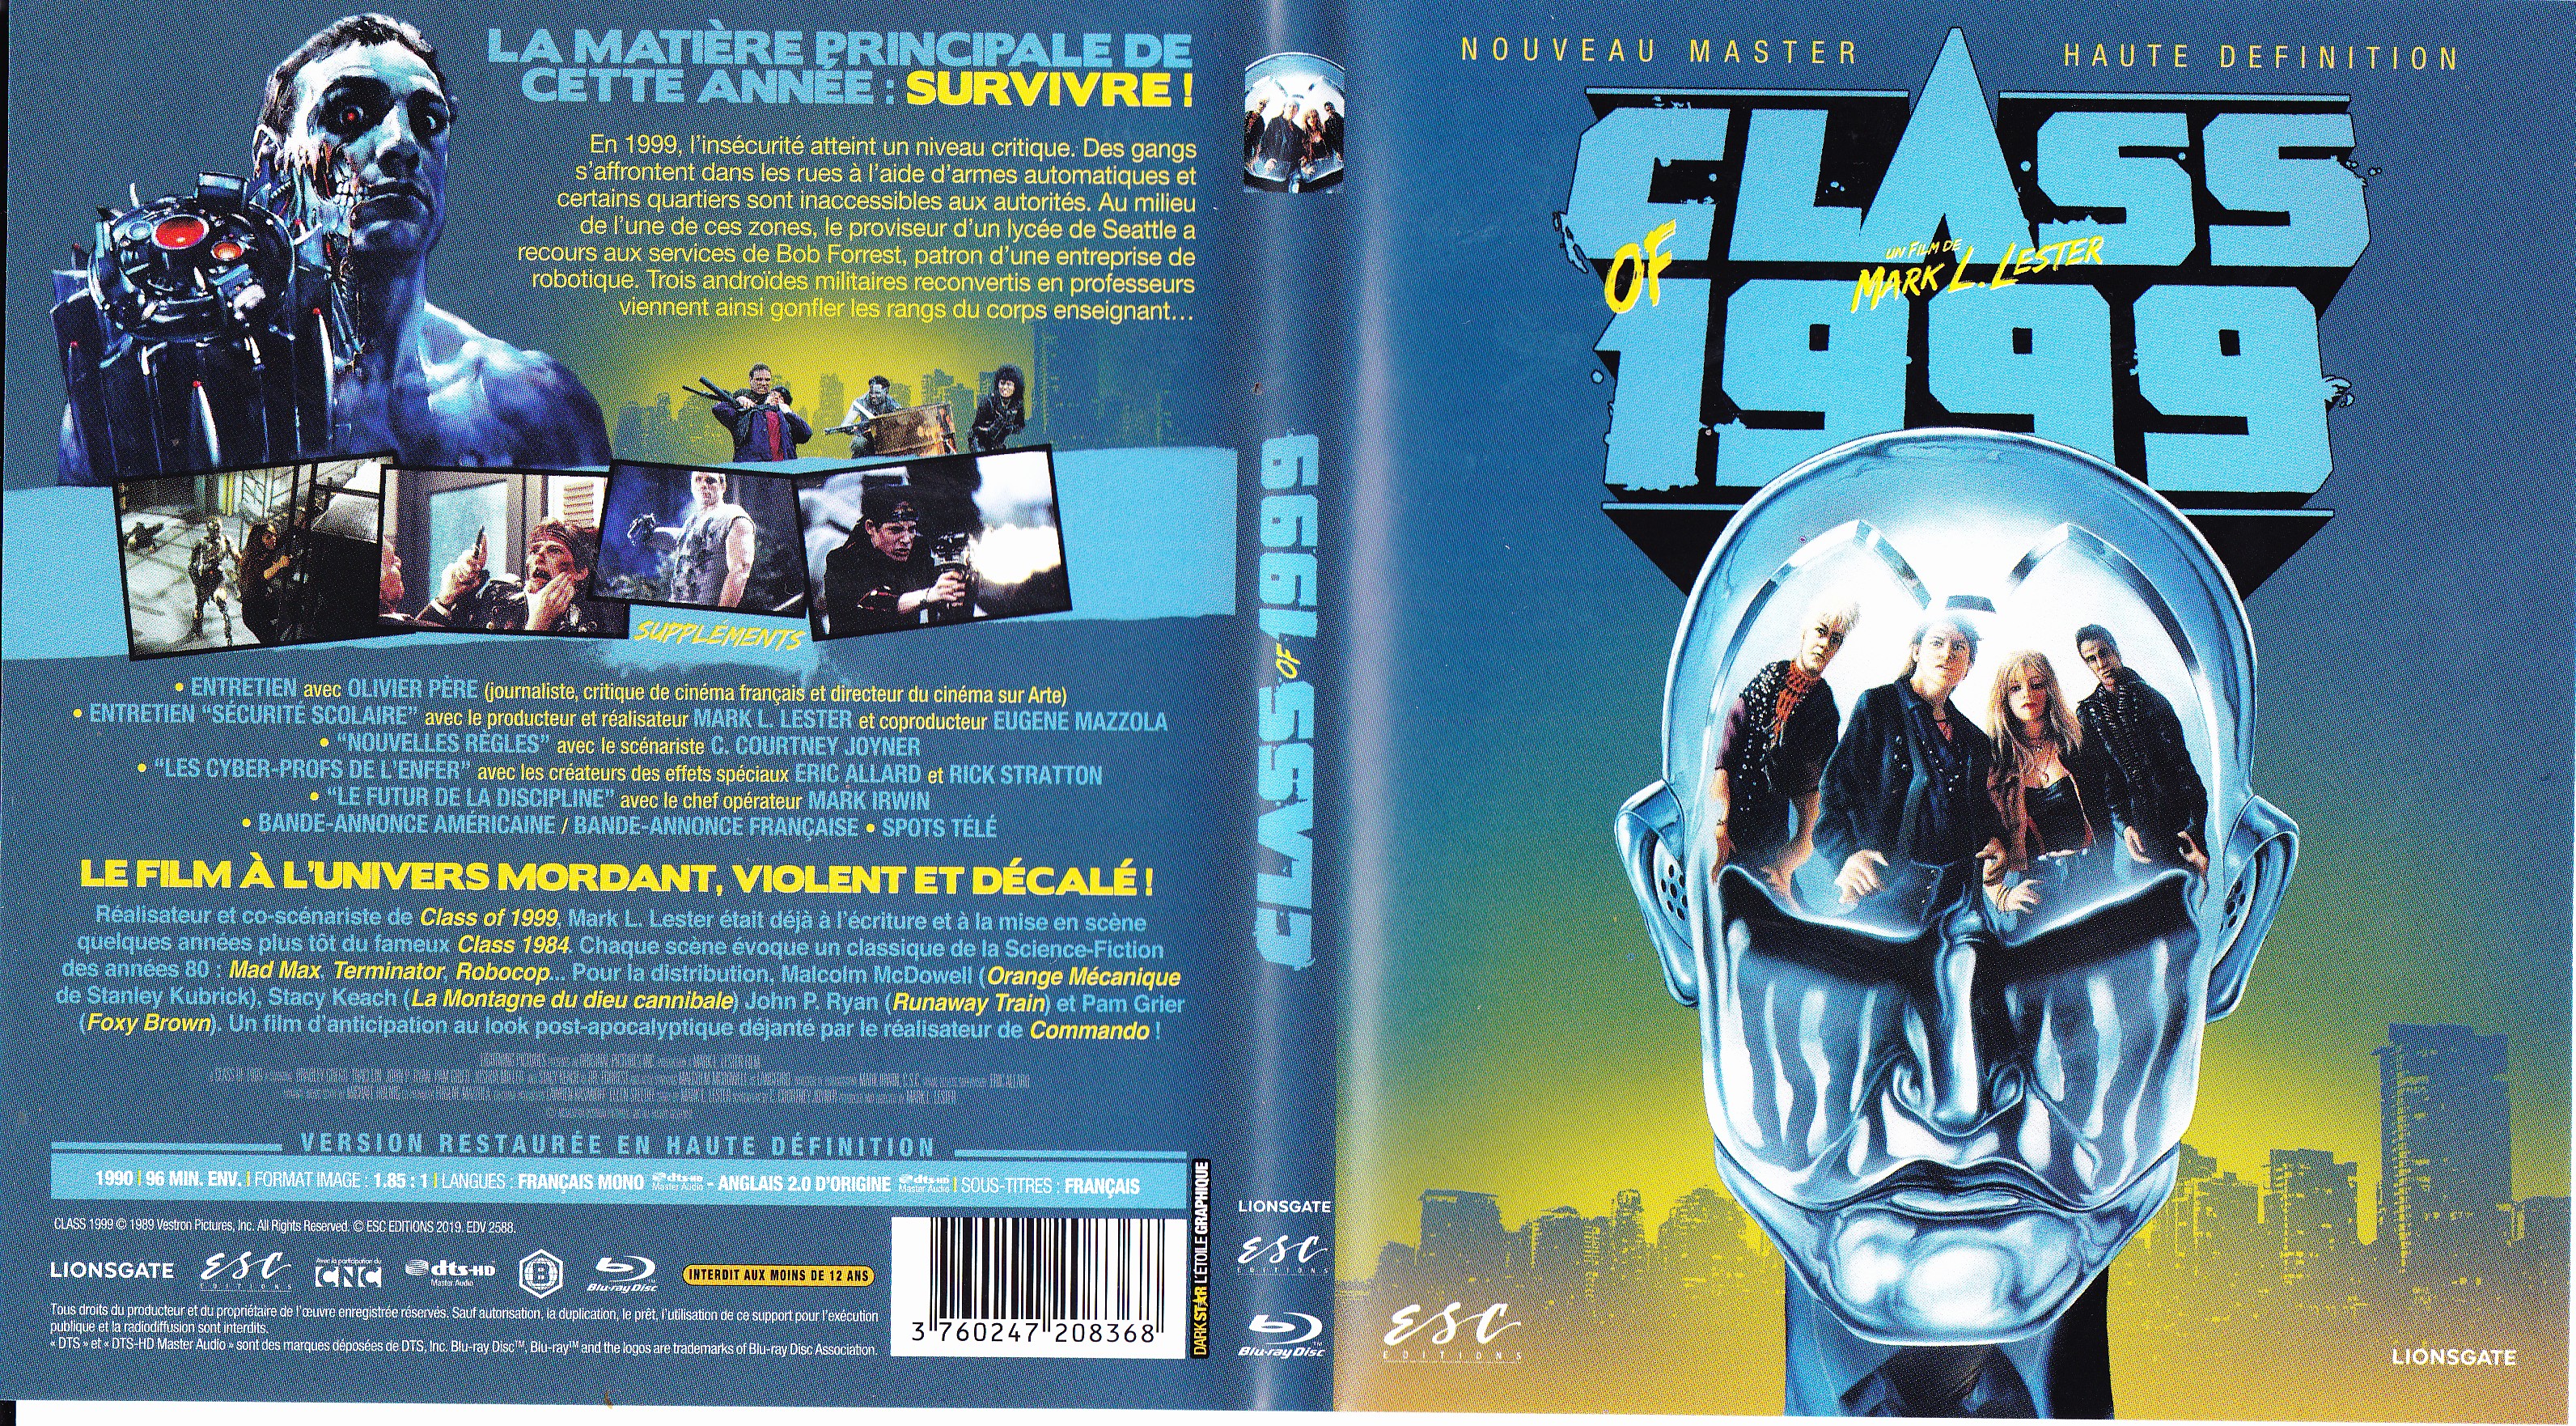 Jaquette DVD Class of 1999 (BLU-RAY) v2